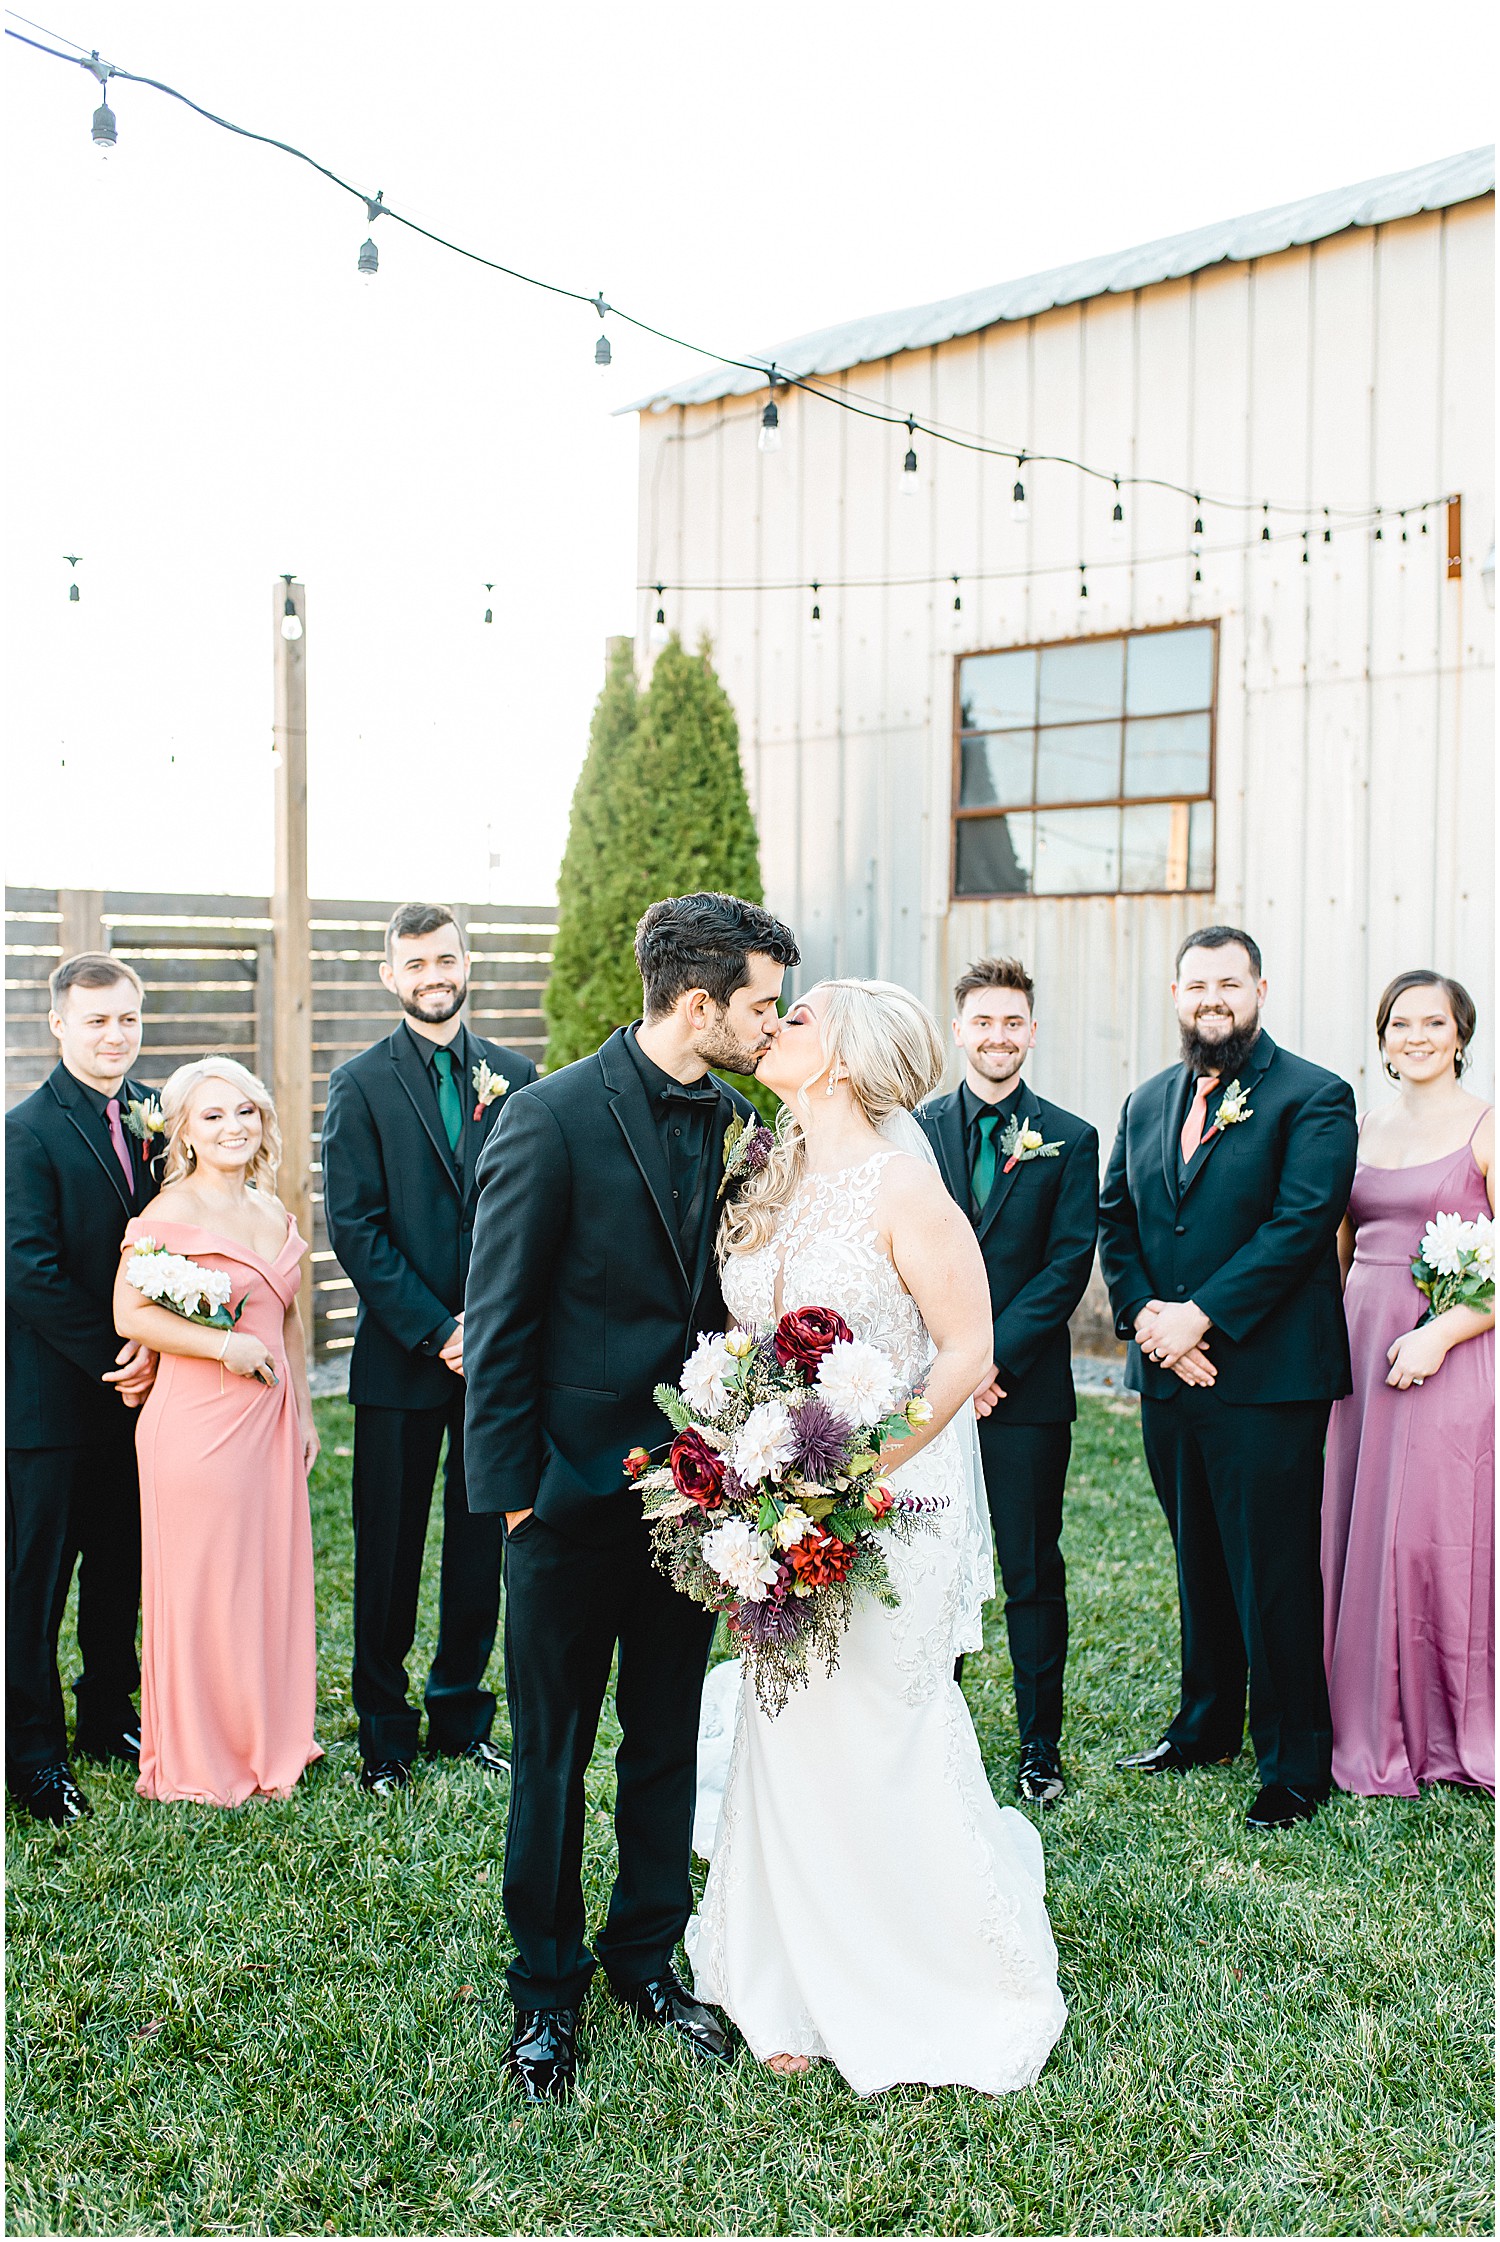 bride and groom kiss with wedding party in background